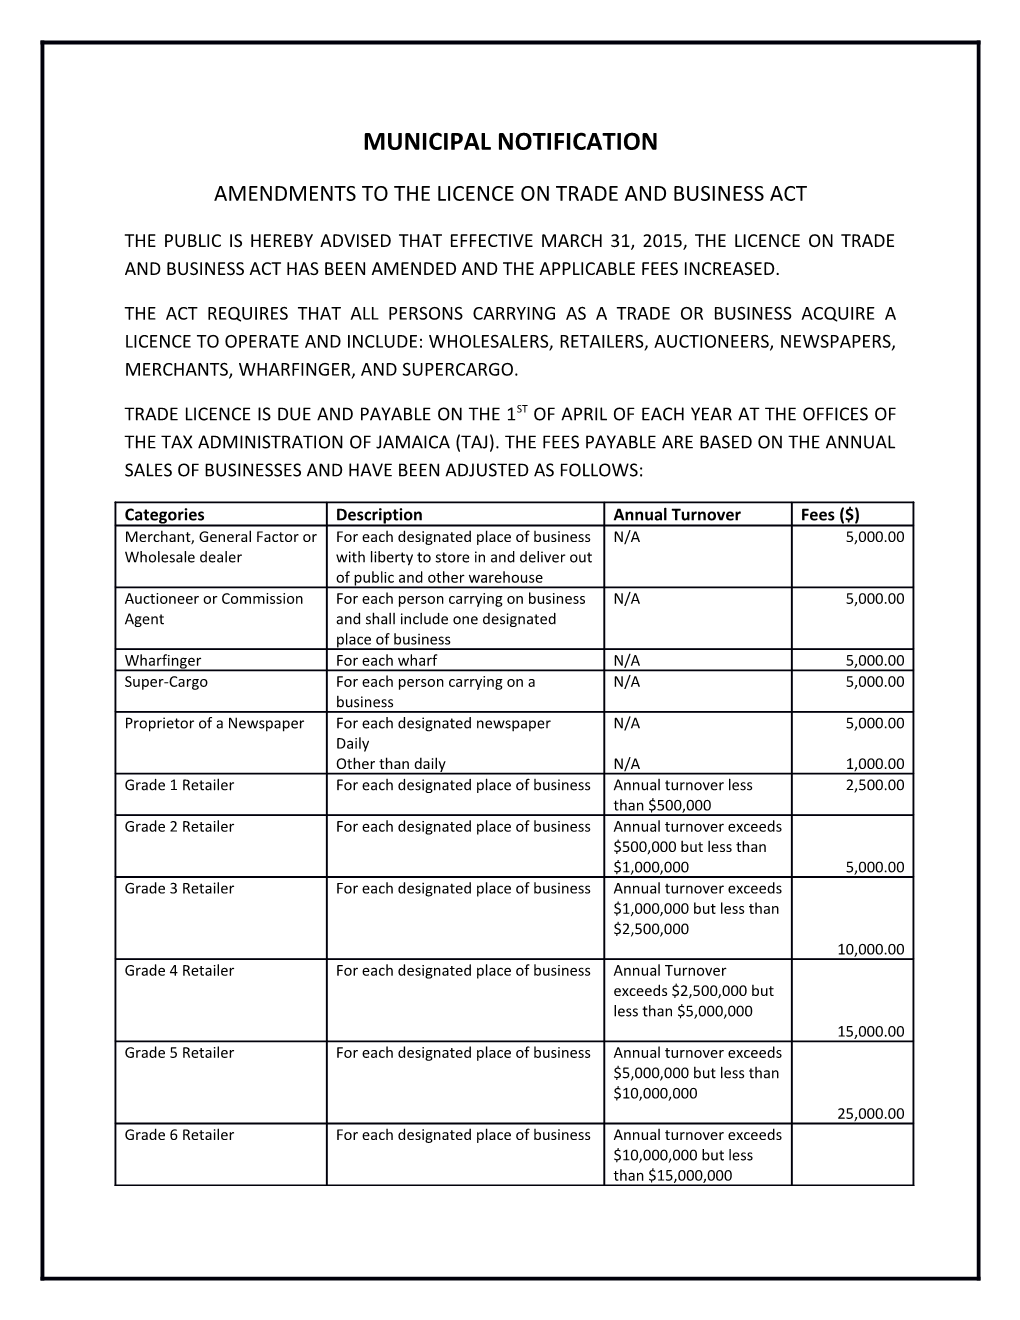 Amendments to the Licence on Trade and Business Act